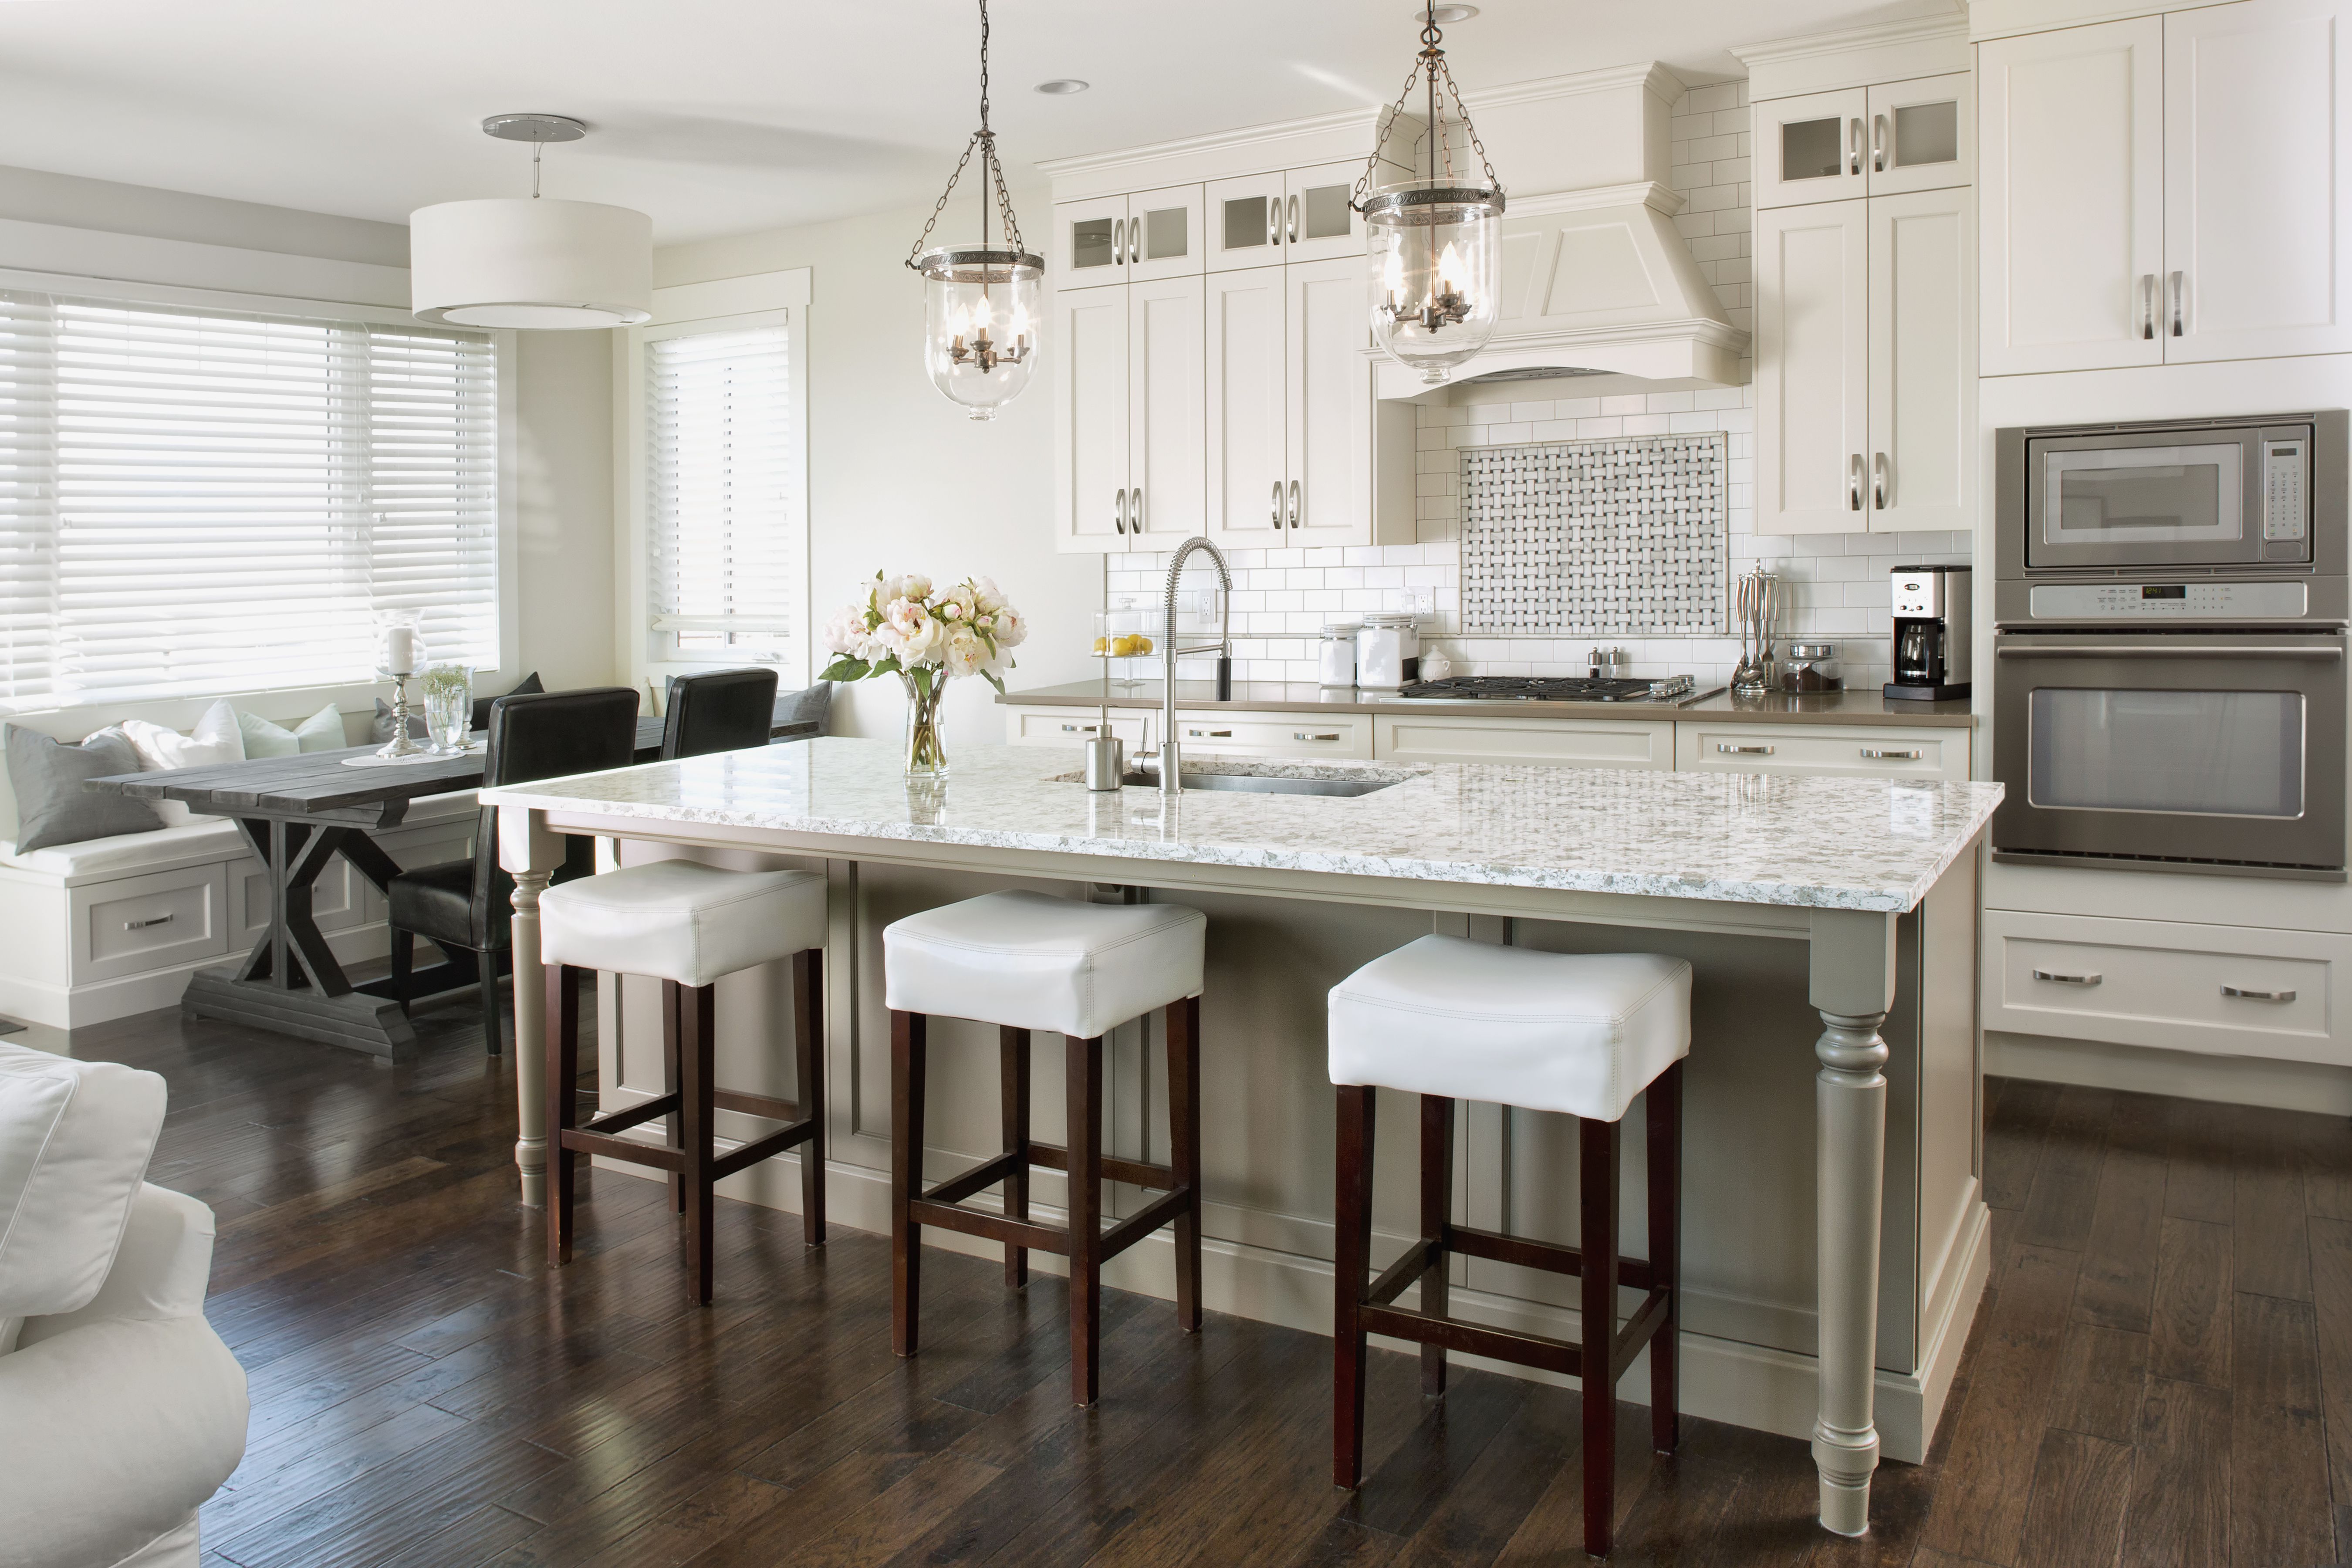 Guide to High End Kitchen Cabinetry